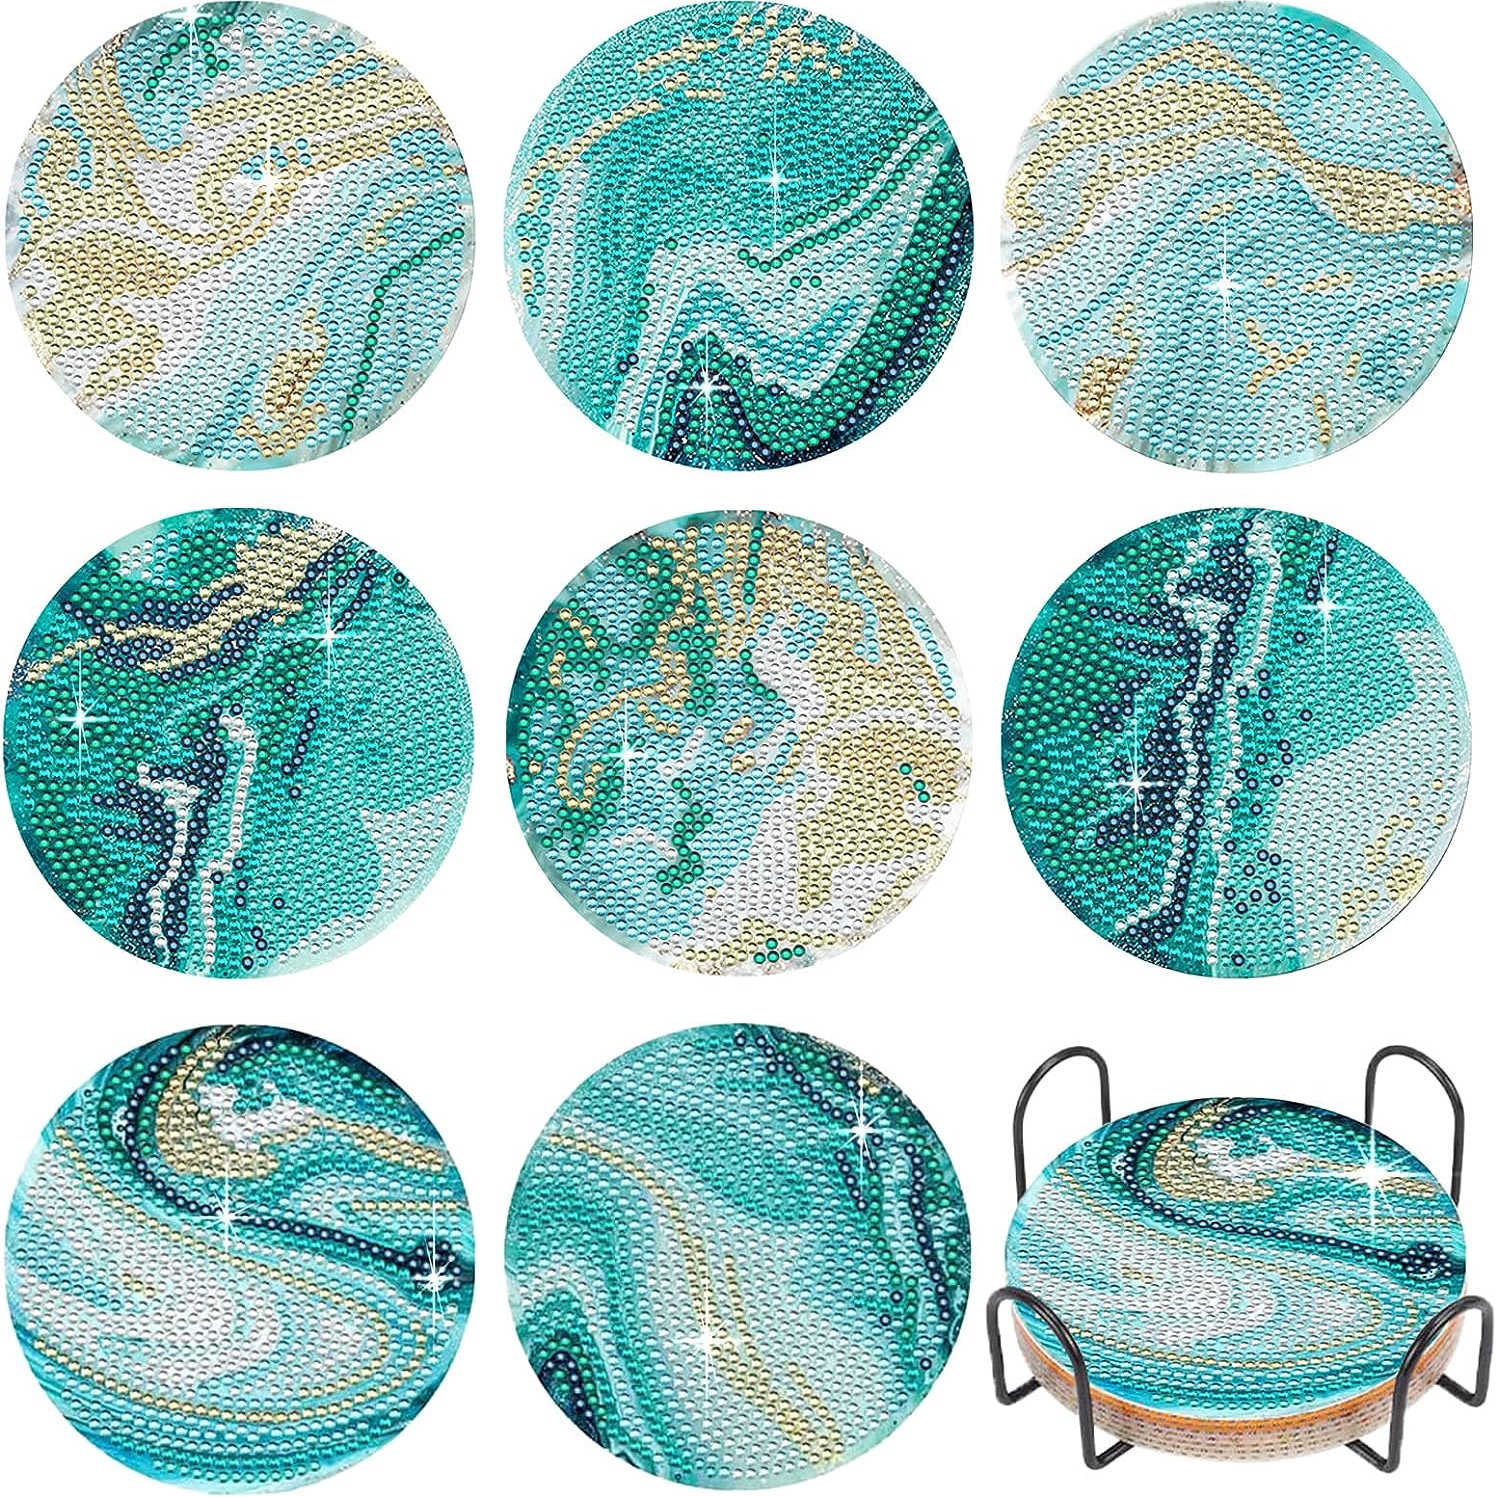 8 Pcs Diamond Painting Coasters With Holder DIY Blue Marble Ocean Diamond  Art Coasters For Drinks Diamond Painting Kits For Beginners Diamond Art Kits  Craft Supplies For Adults Coasters Gift